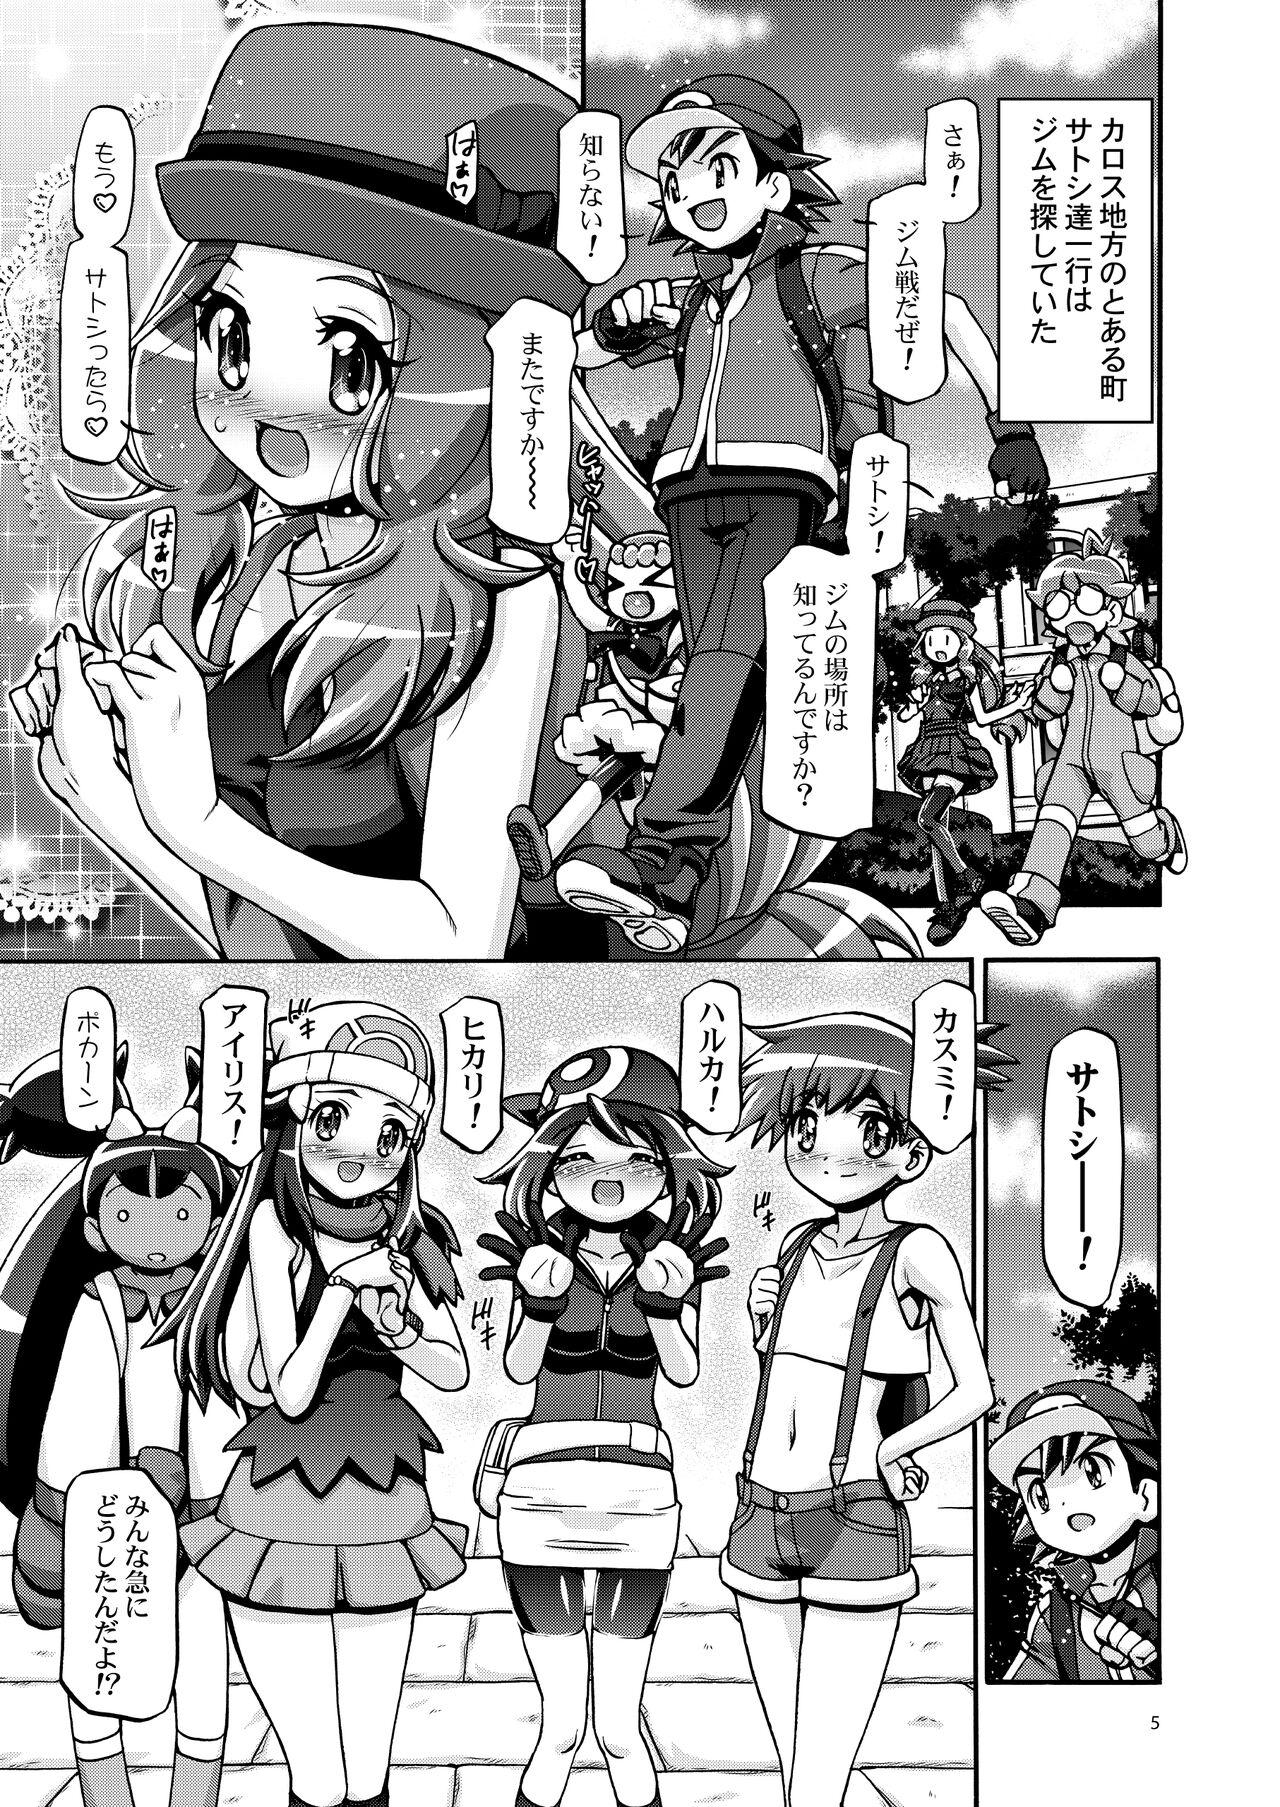 Free Amature PM GALS XY - Pokemon Behind - Page 4